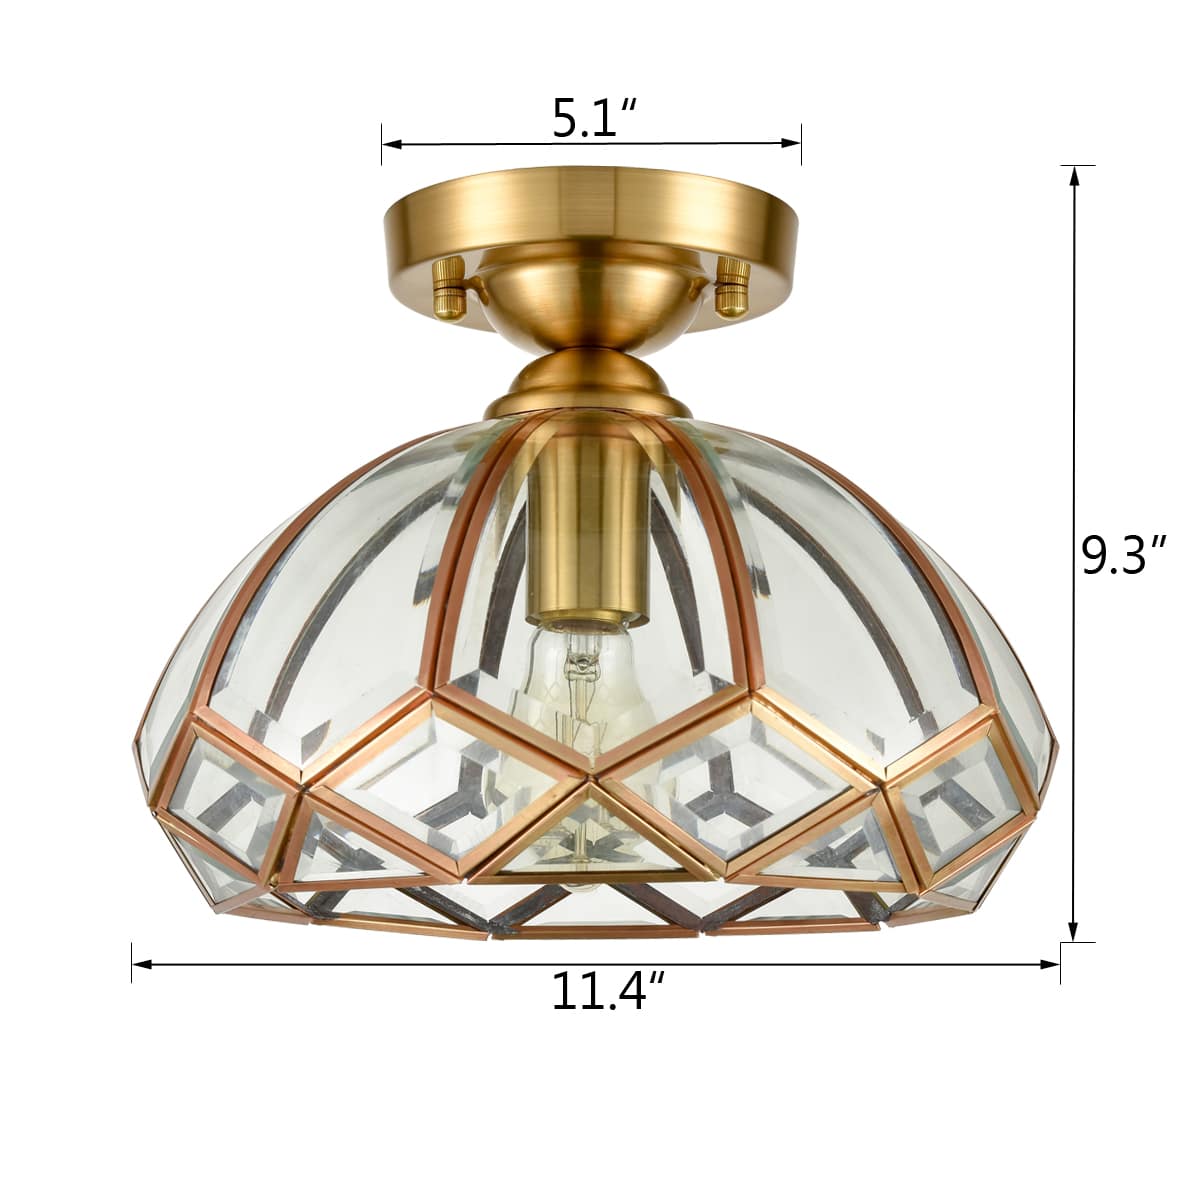 Dome-Shaped, Vintage, Glass Ceiling Light Fixture